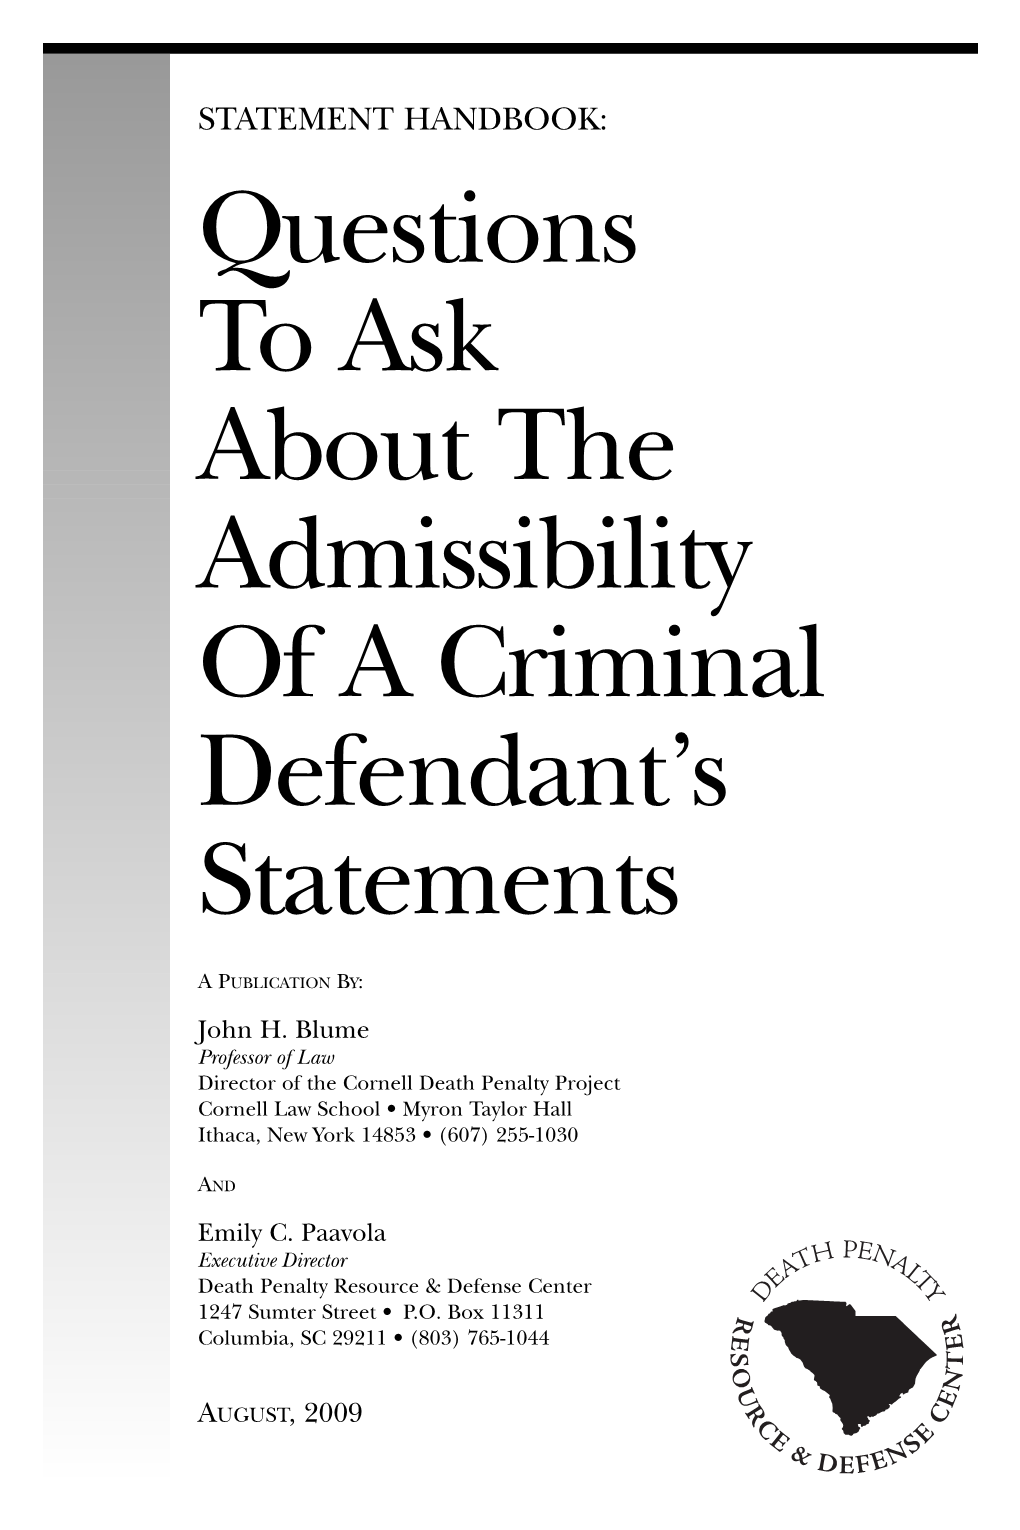 STATEMENT HANDBOOK: Questions to Ask About the Admissibility of a Criminal Defendant’S Statements